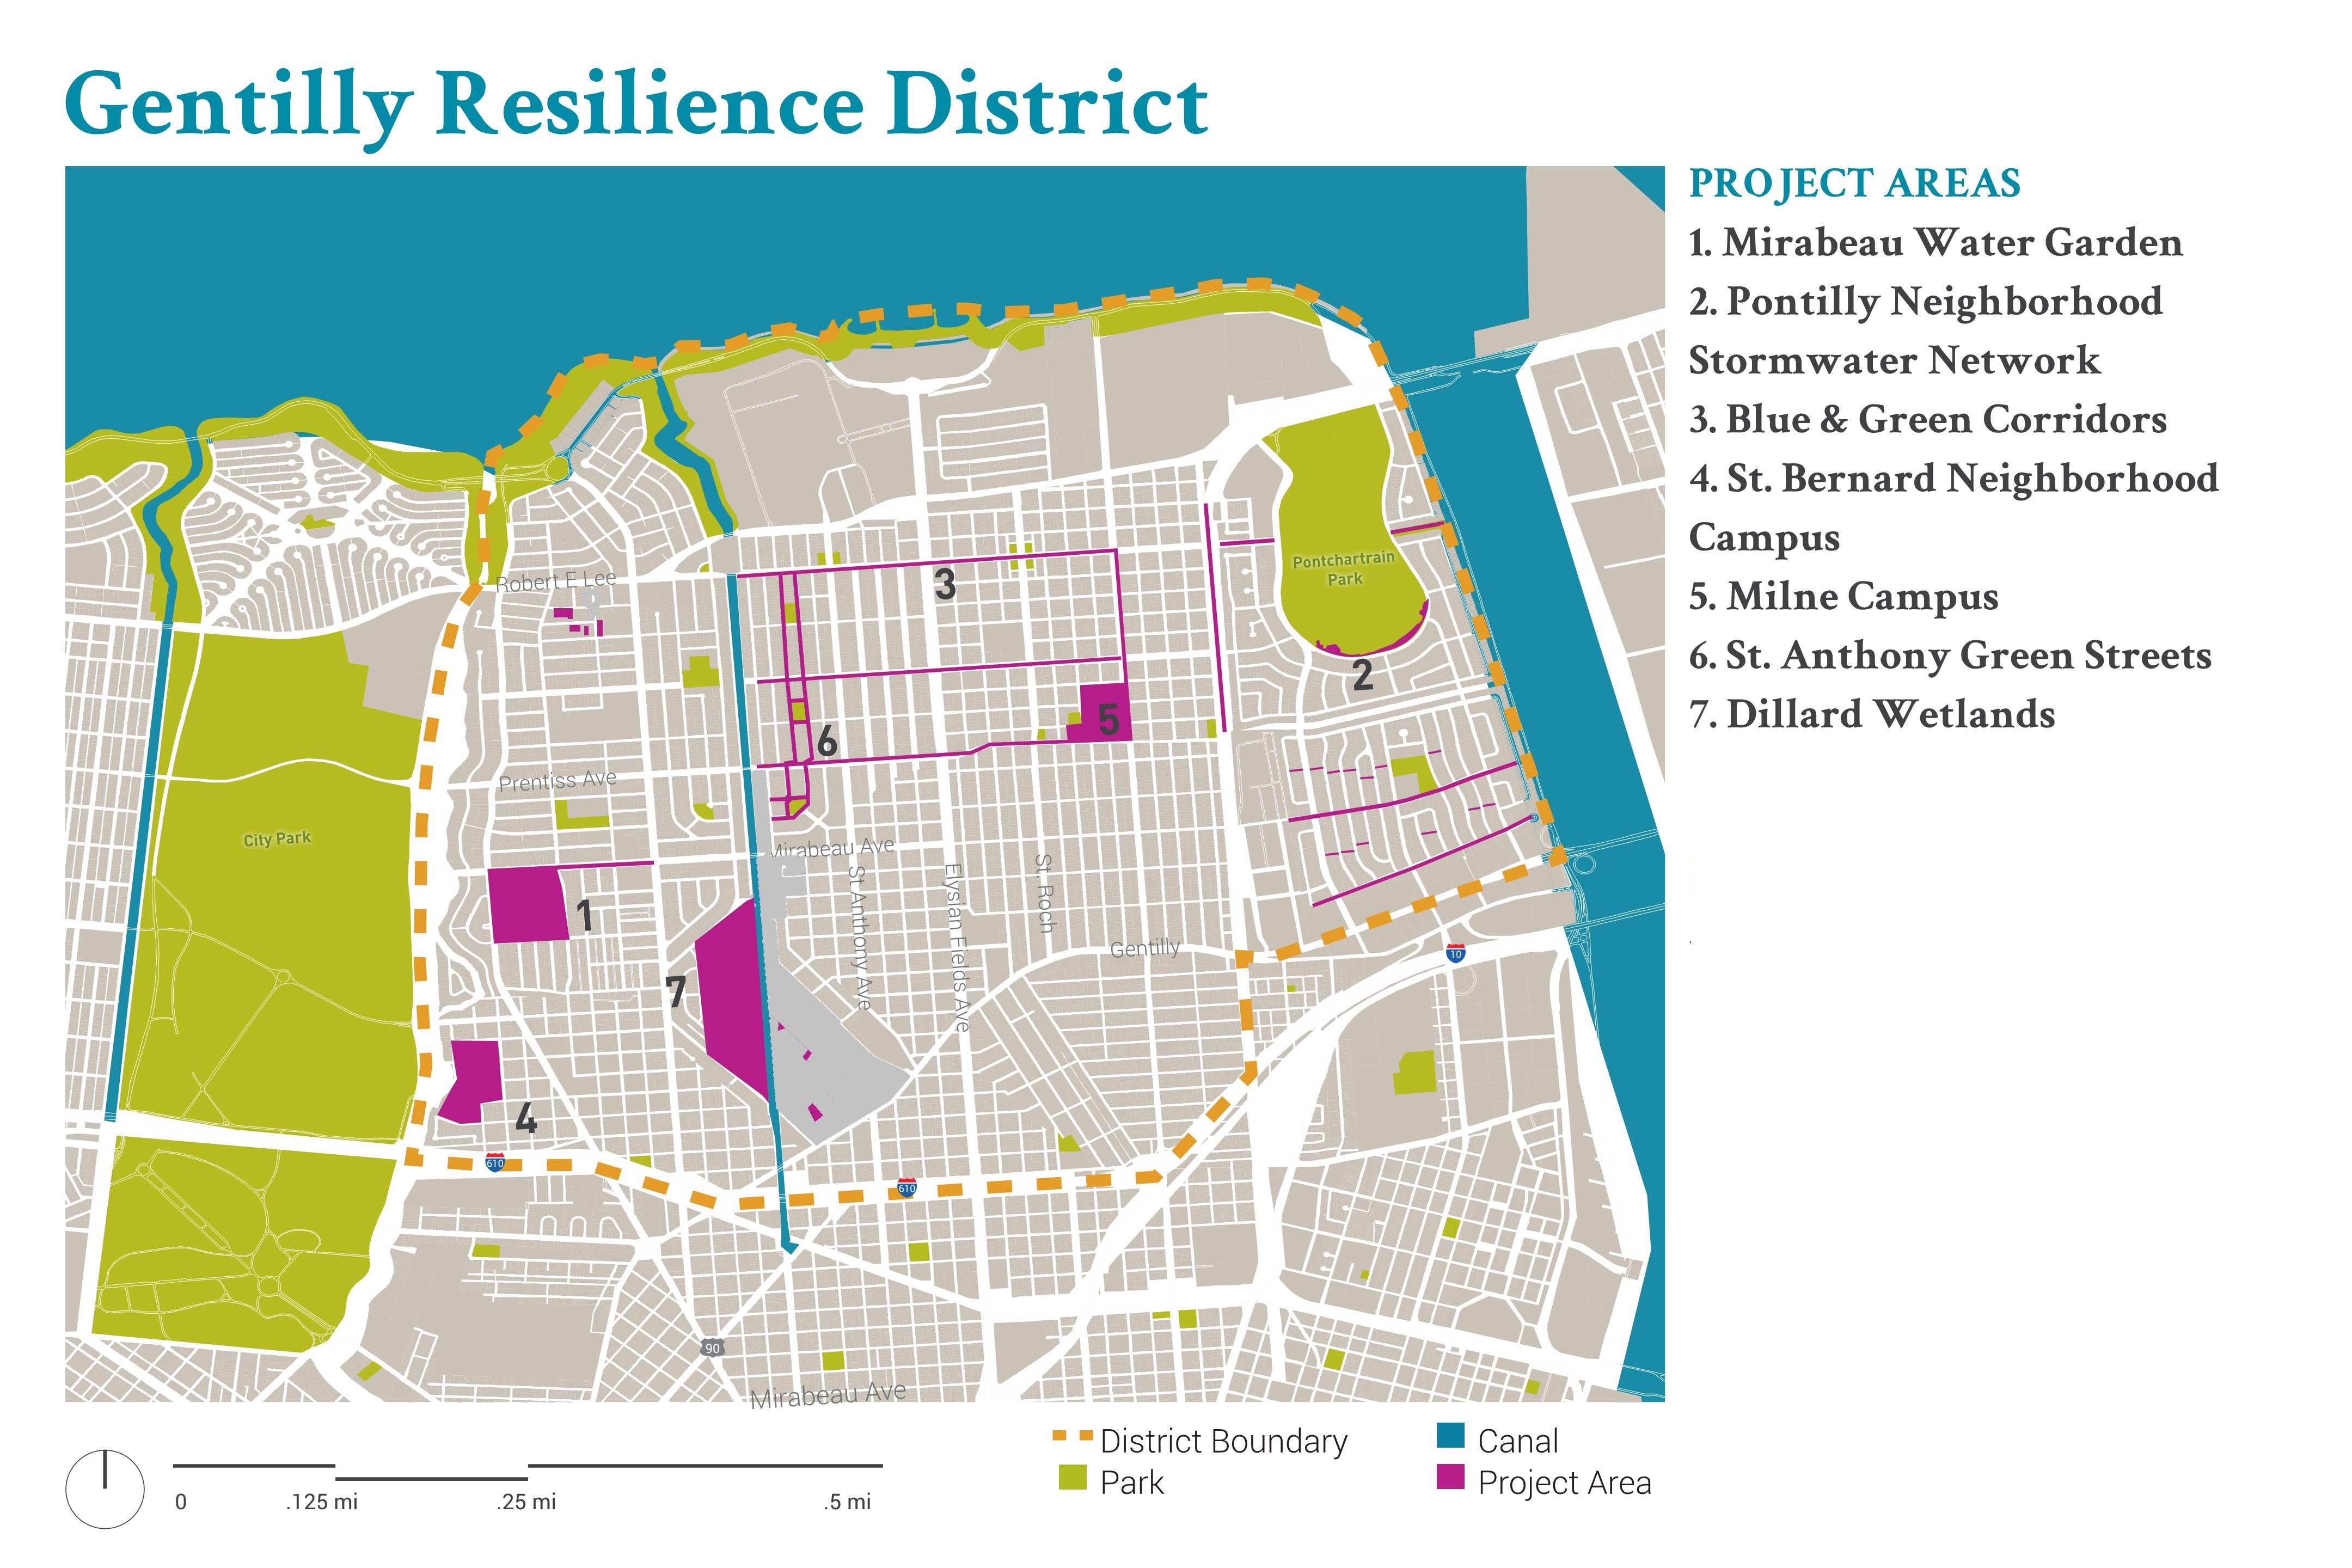 GENTILLY RESILIENCE DISTRICT UPDATES